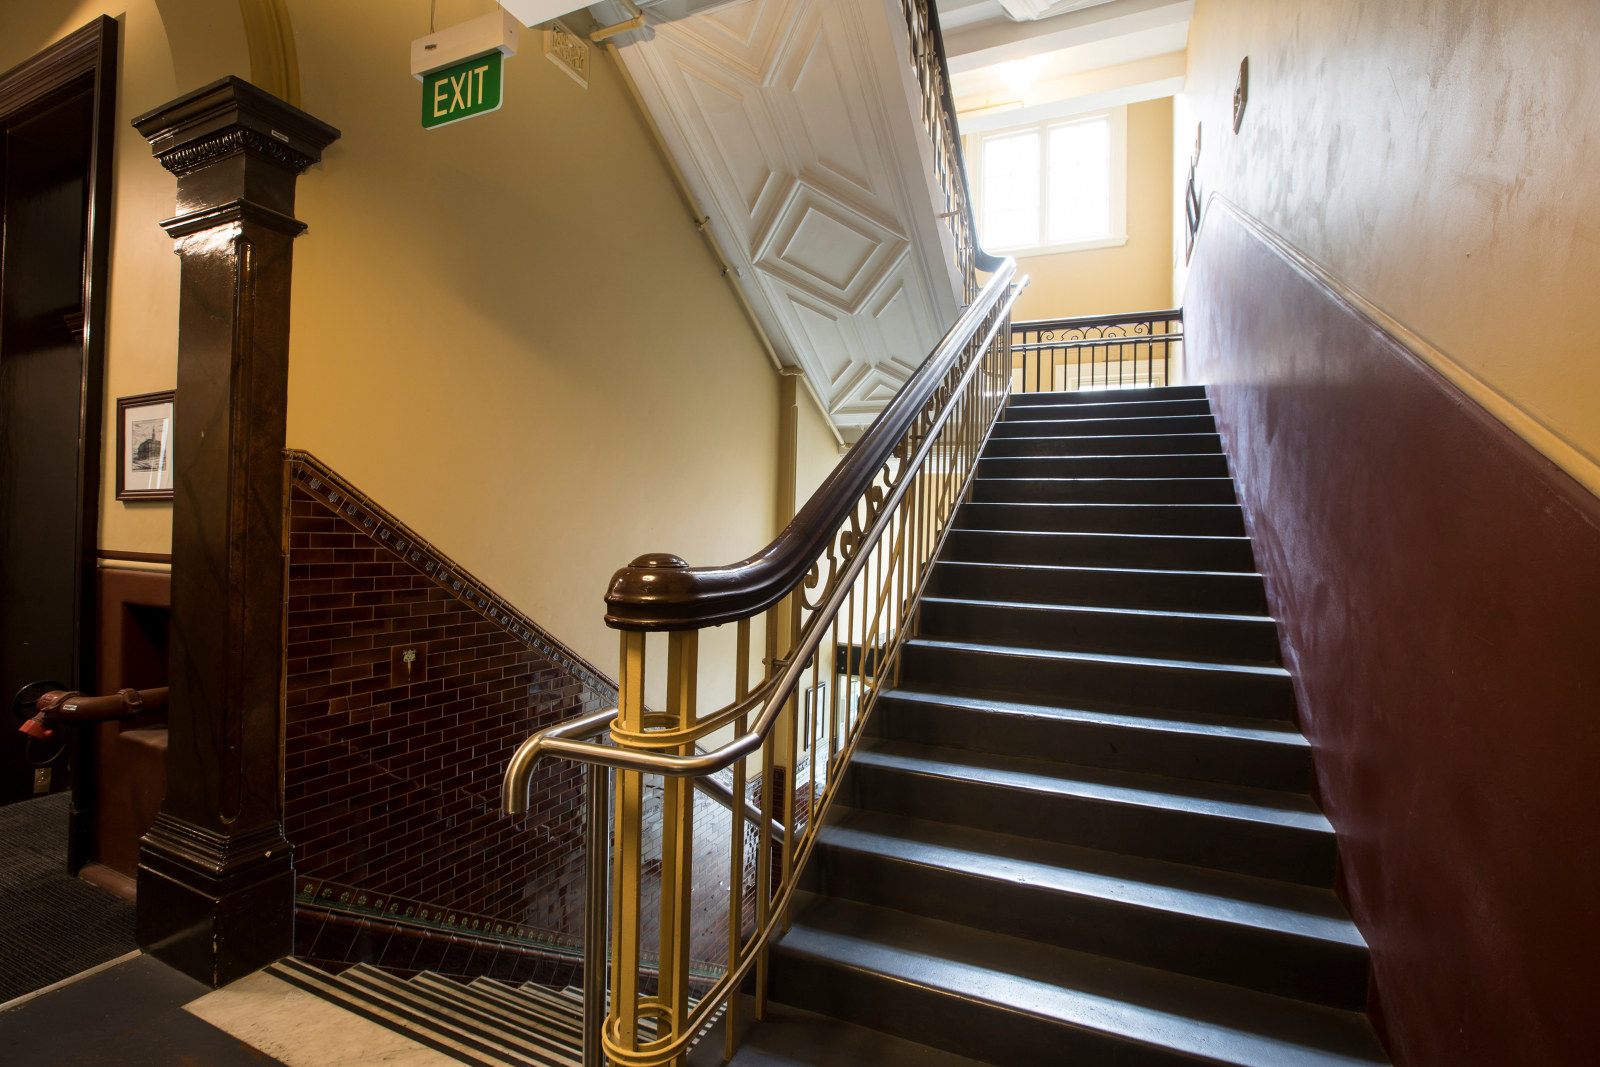 The main stairs of Trades Hall